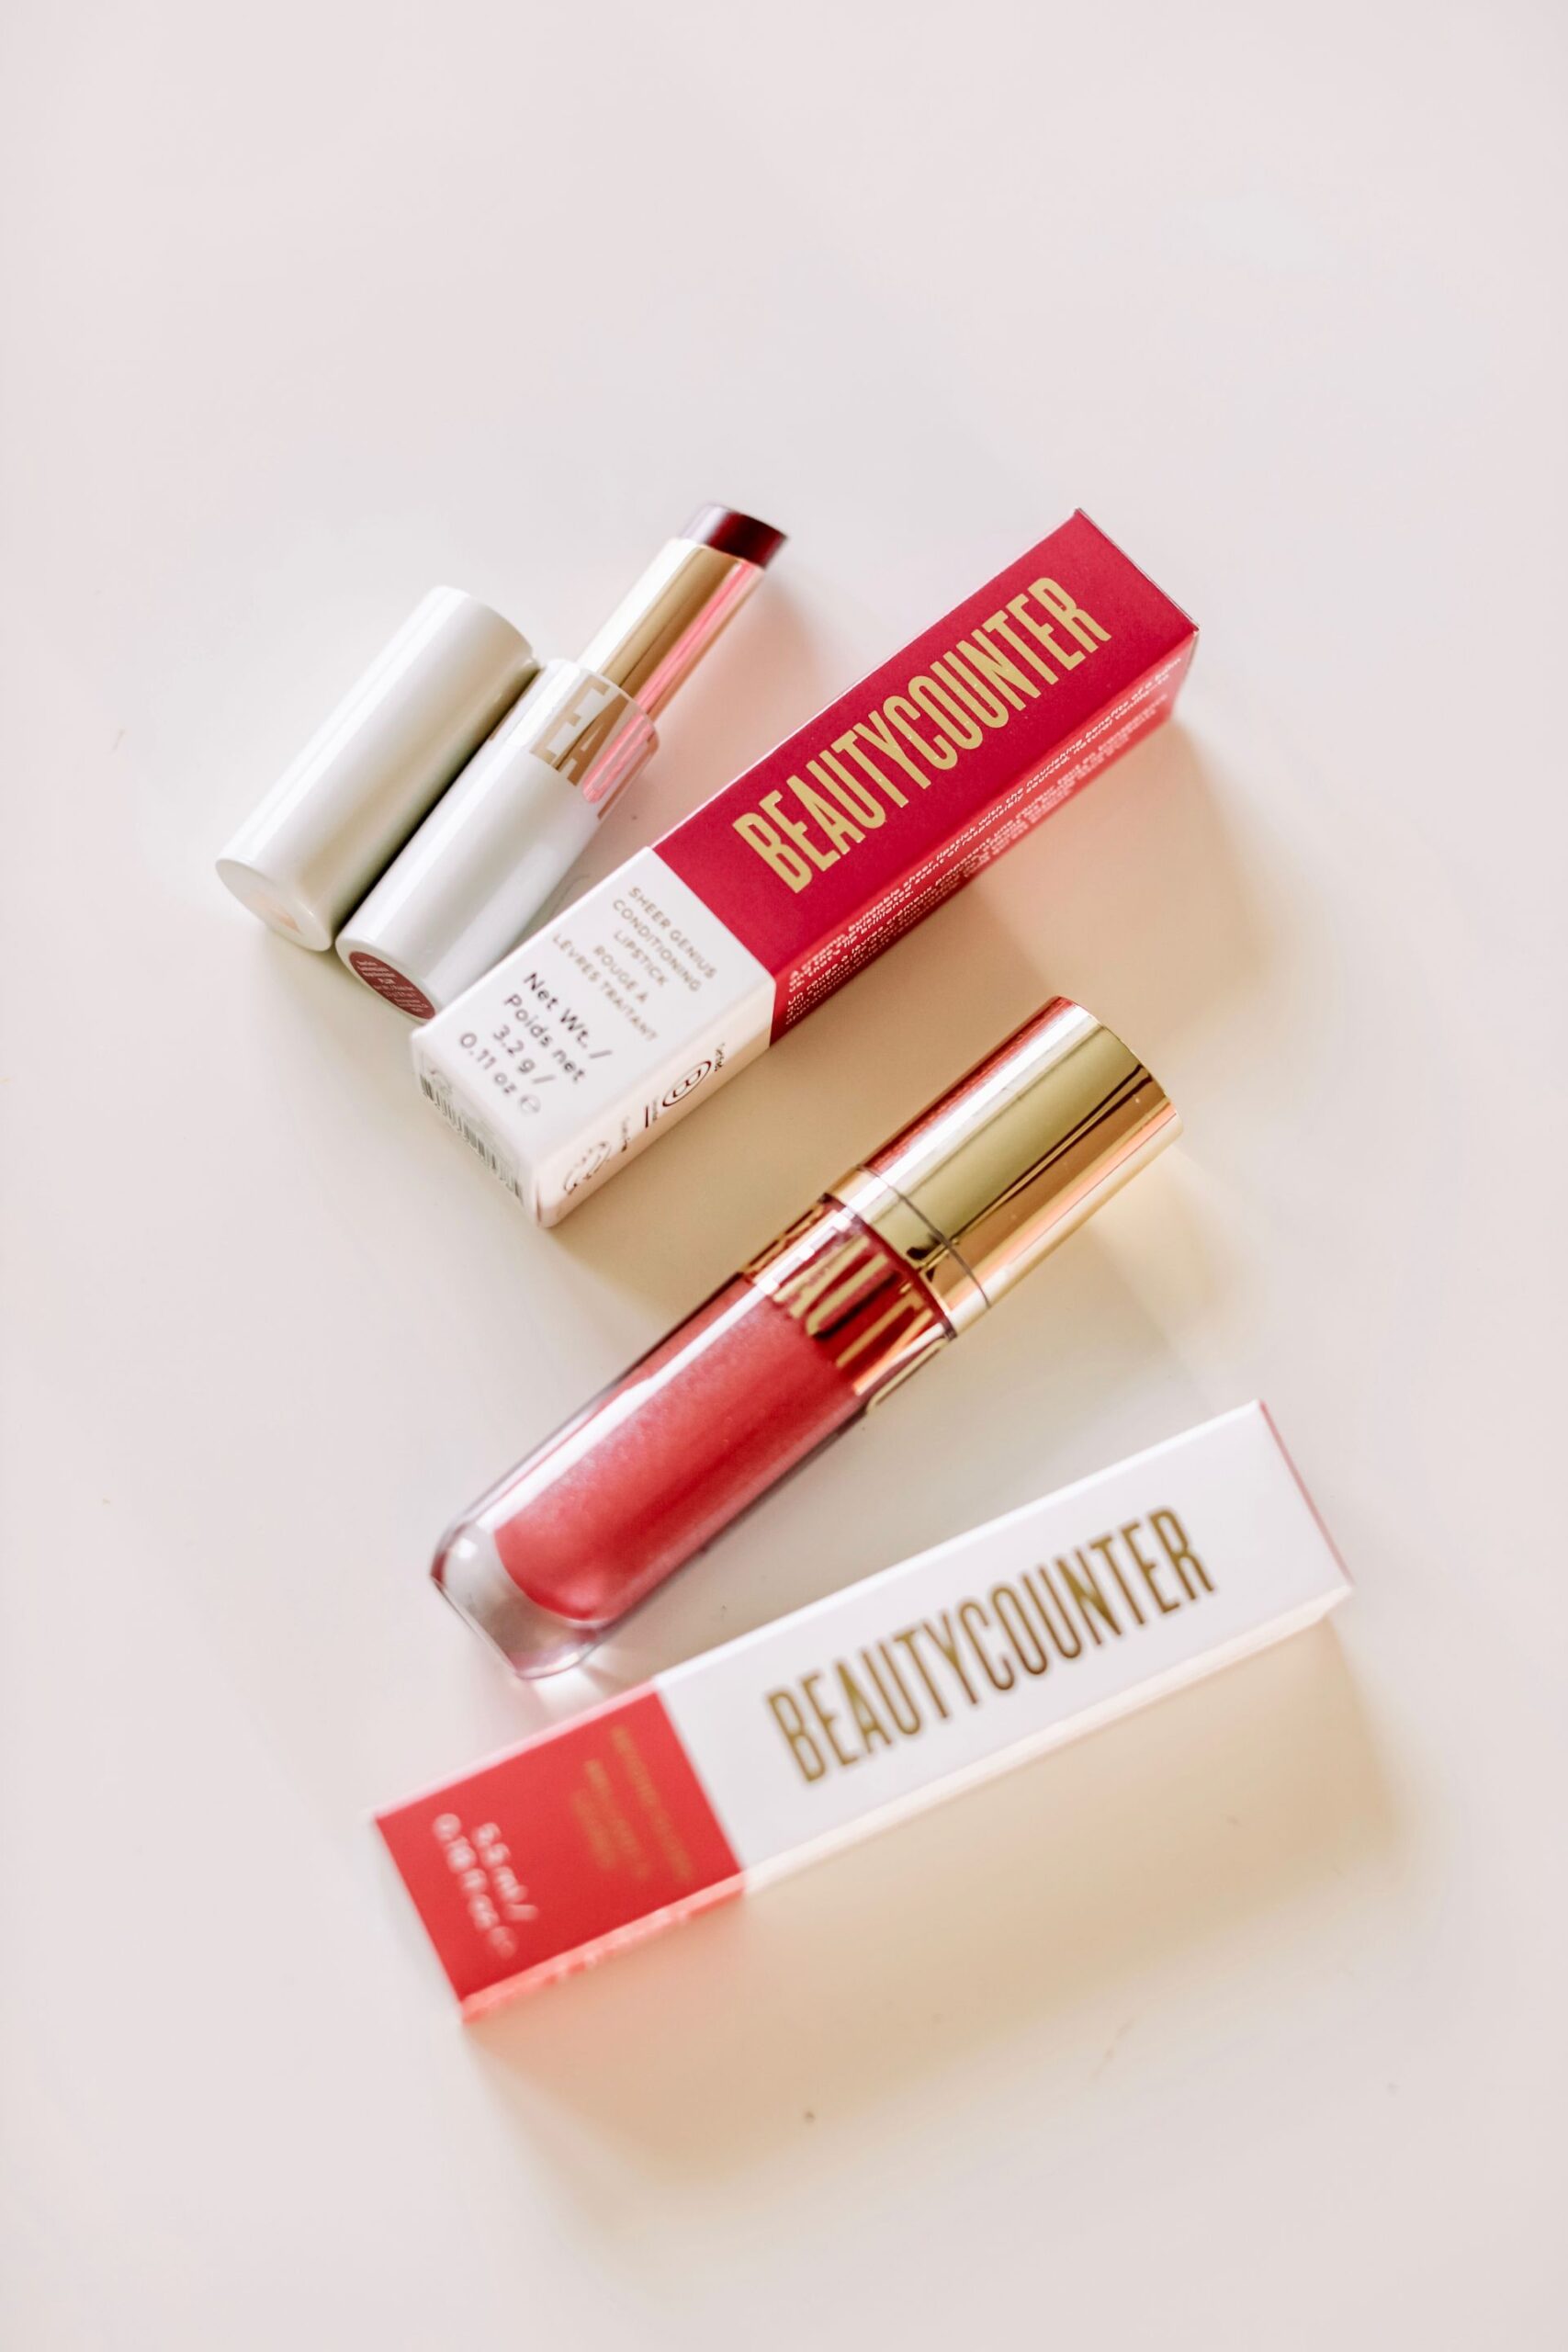 new beautycounter sheer genius lipstick and beyond gloss - Stripes in Bloom